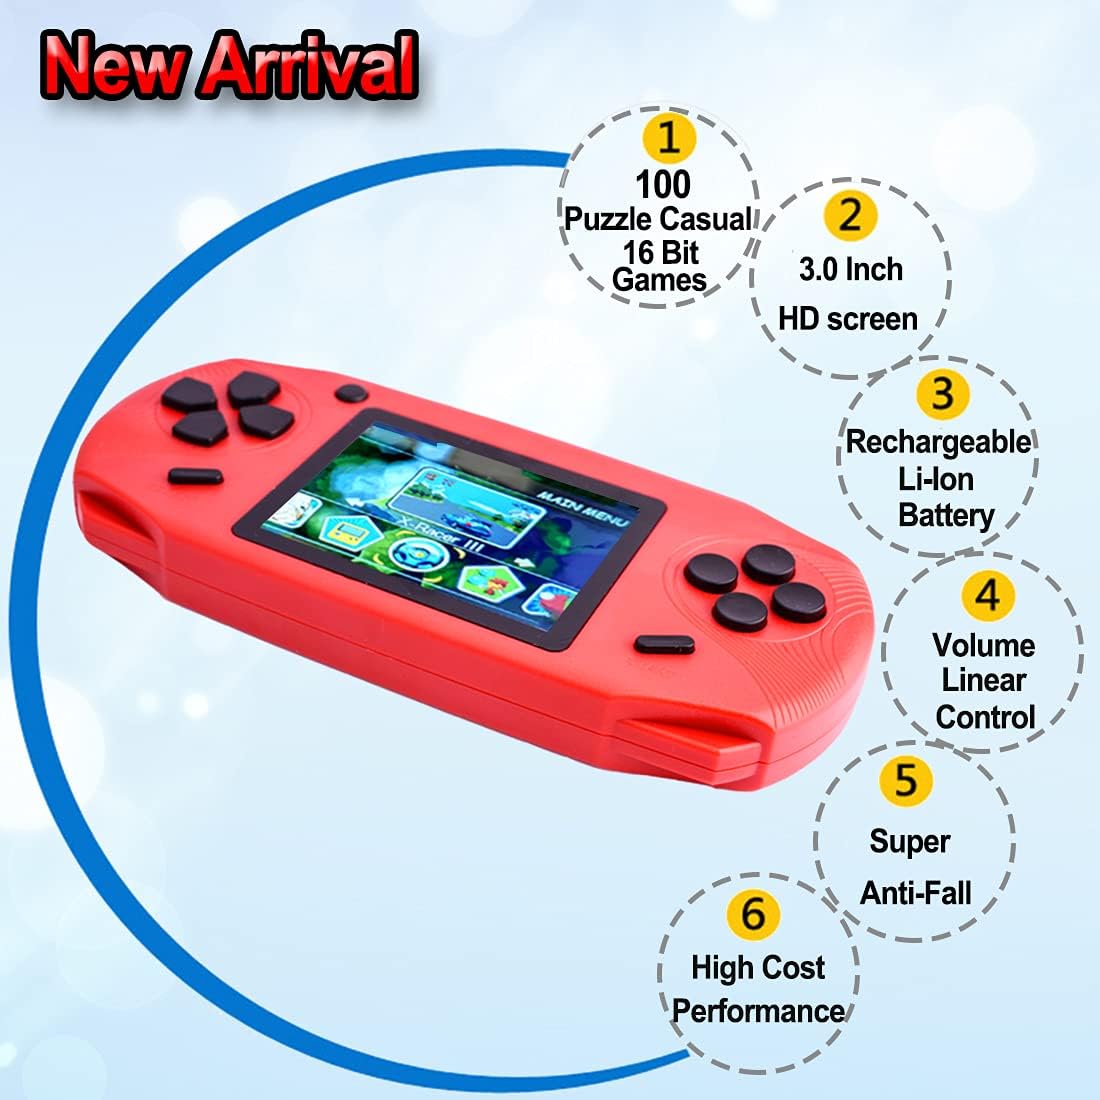 Bornkid 16 Bit Handheld Game Console Review